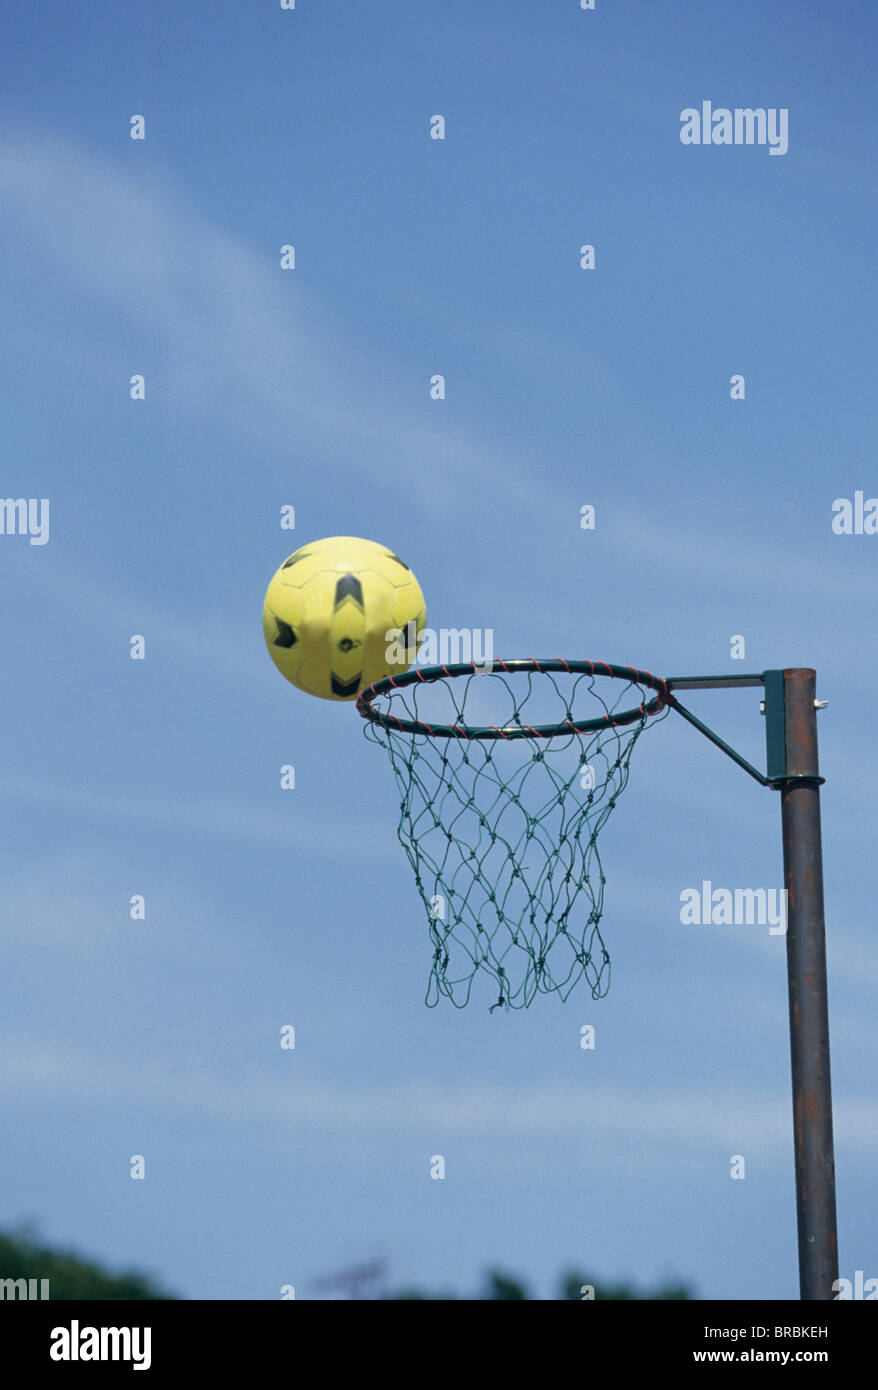 A netball going into the hoop net Stock Photo